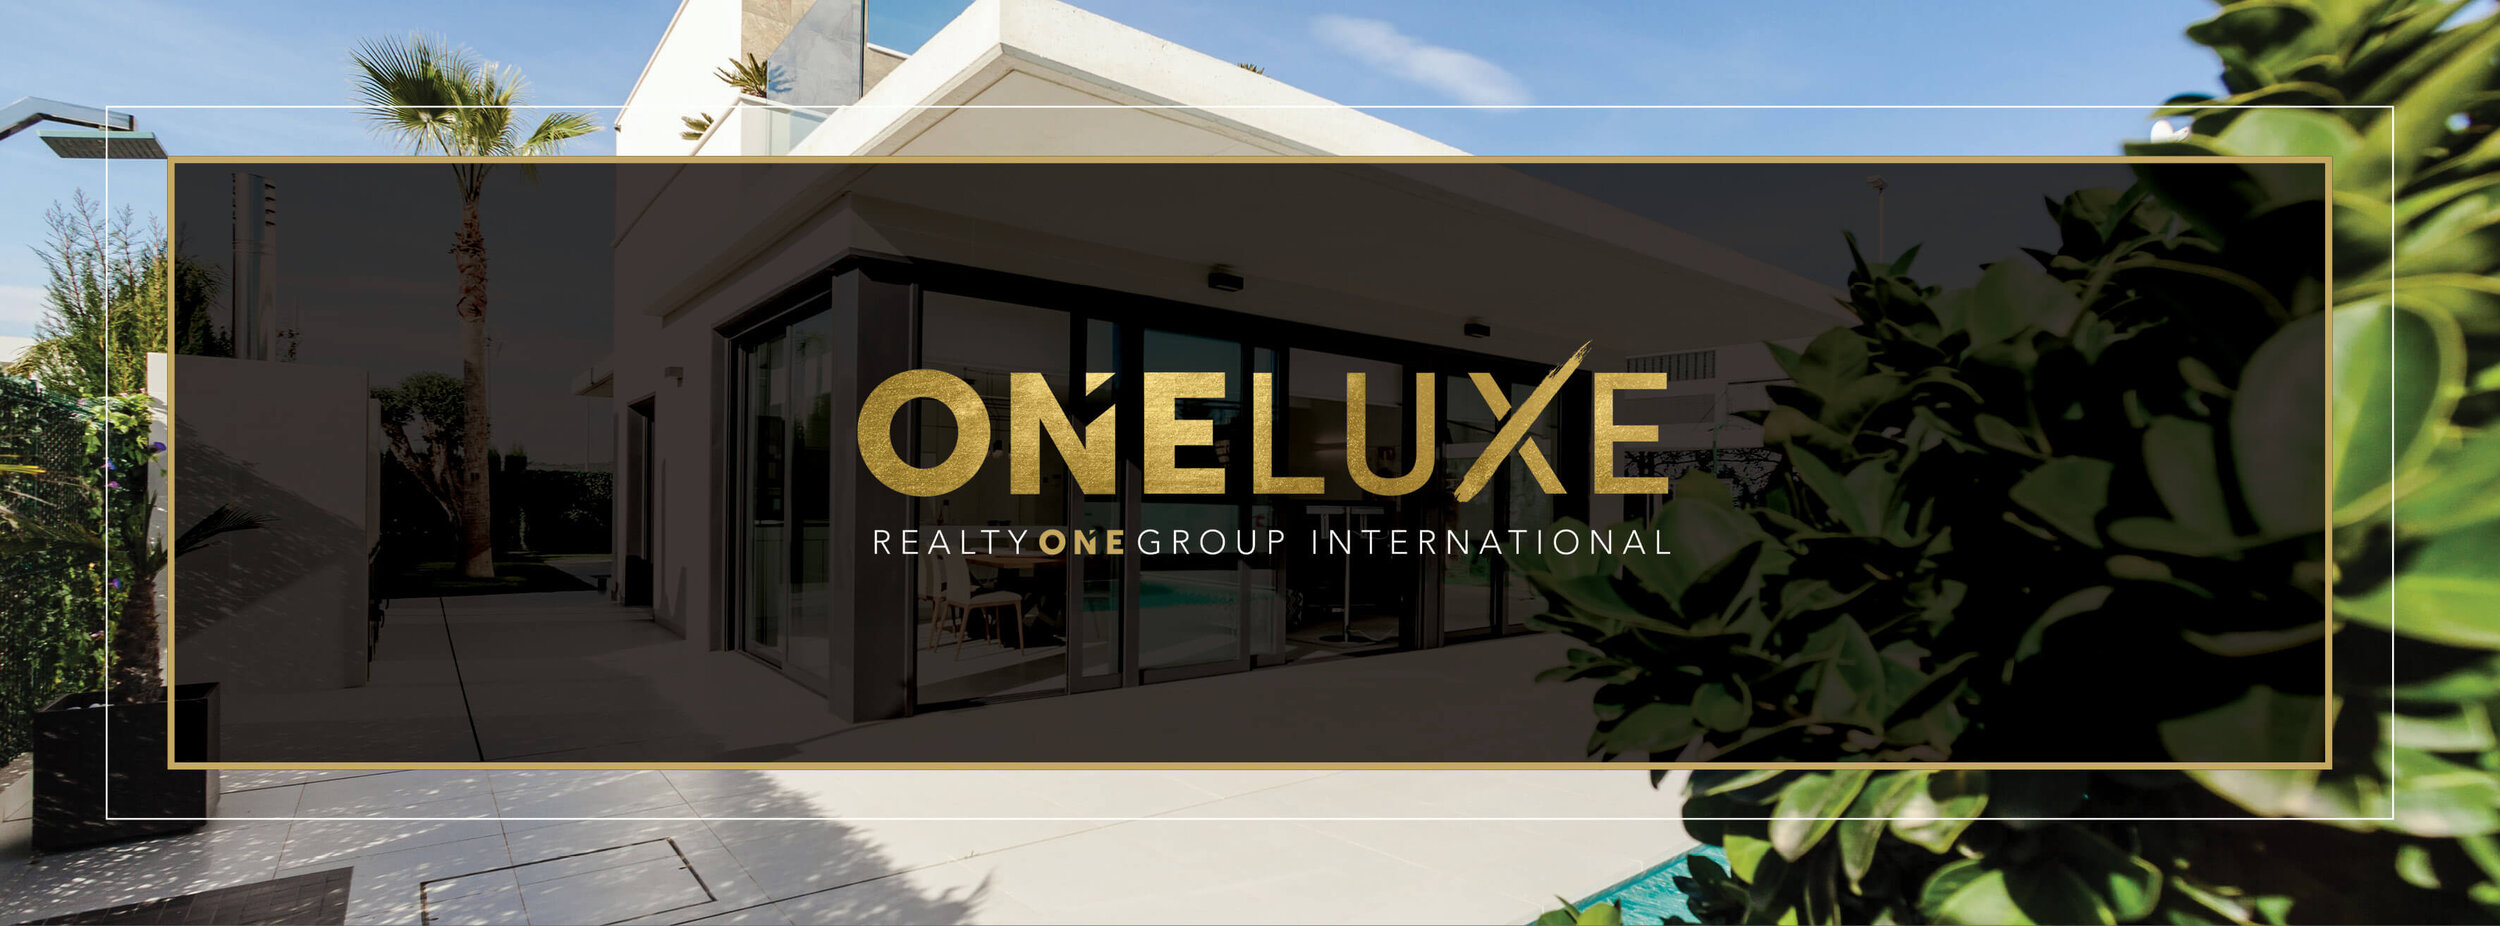 ONE LUXE BRAND INITIATIVE